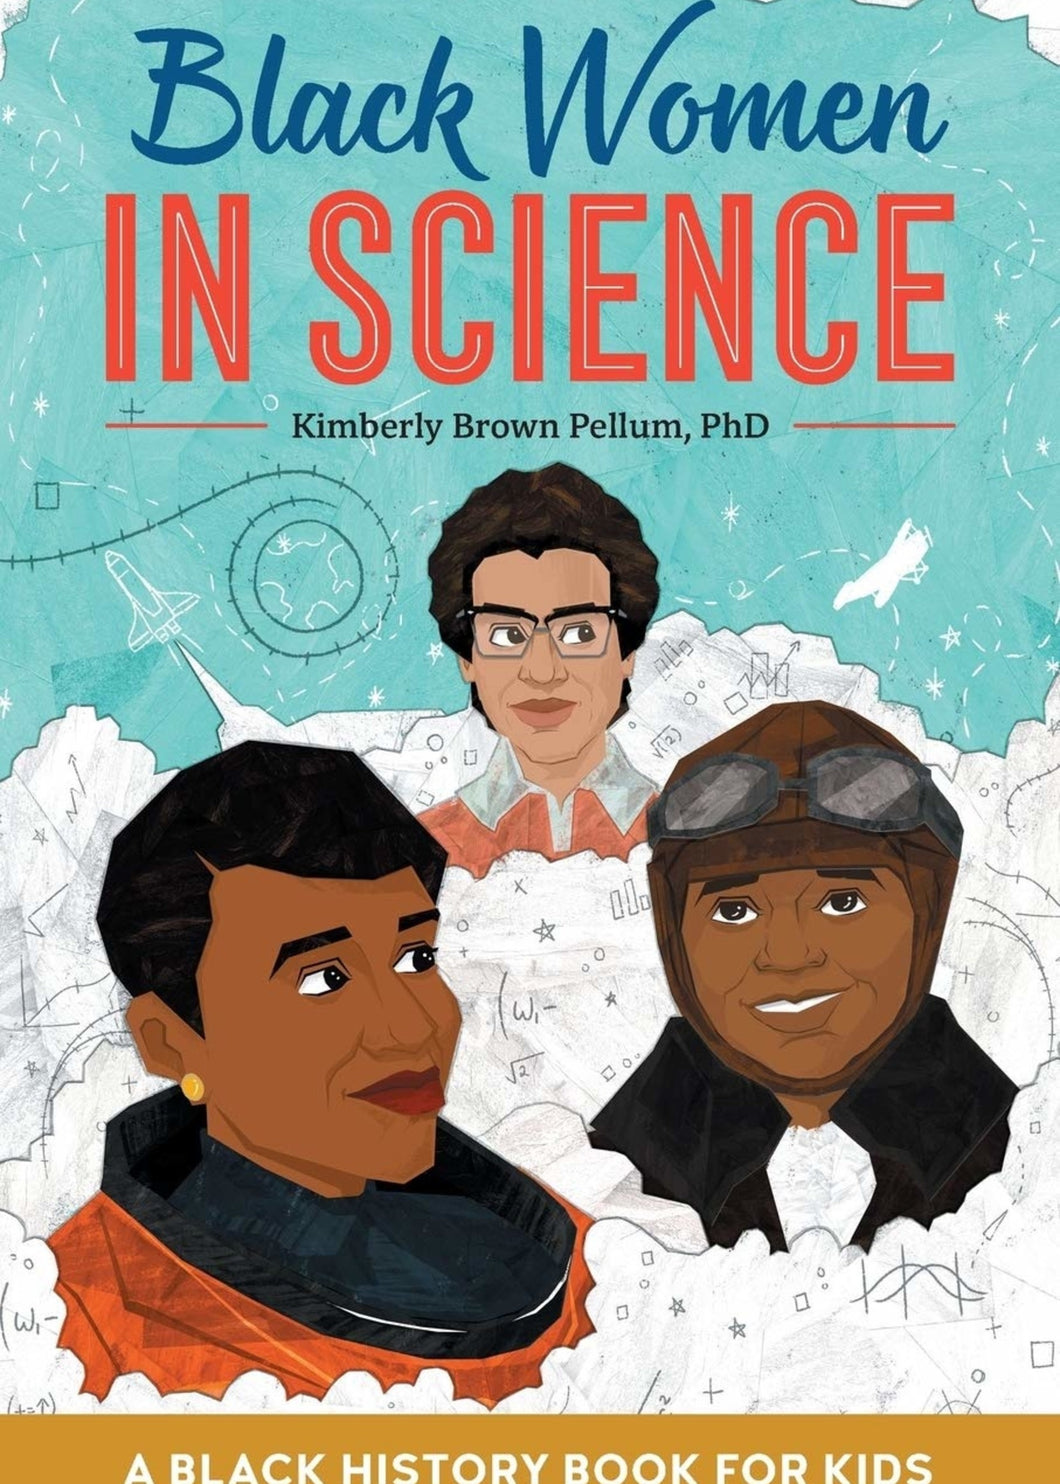 Black Women in Science-A Black History Book for Kids